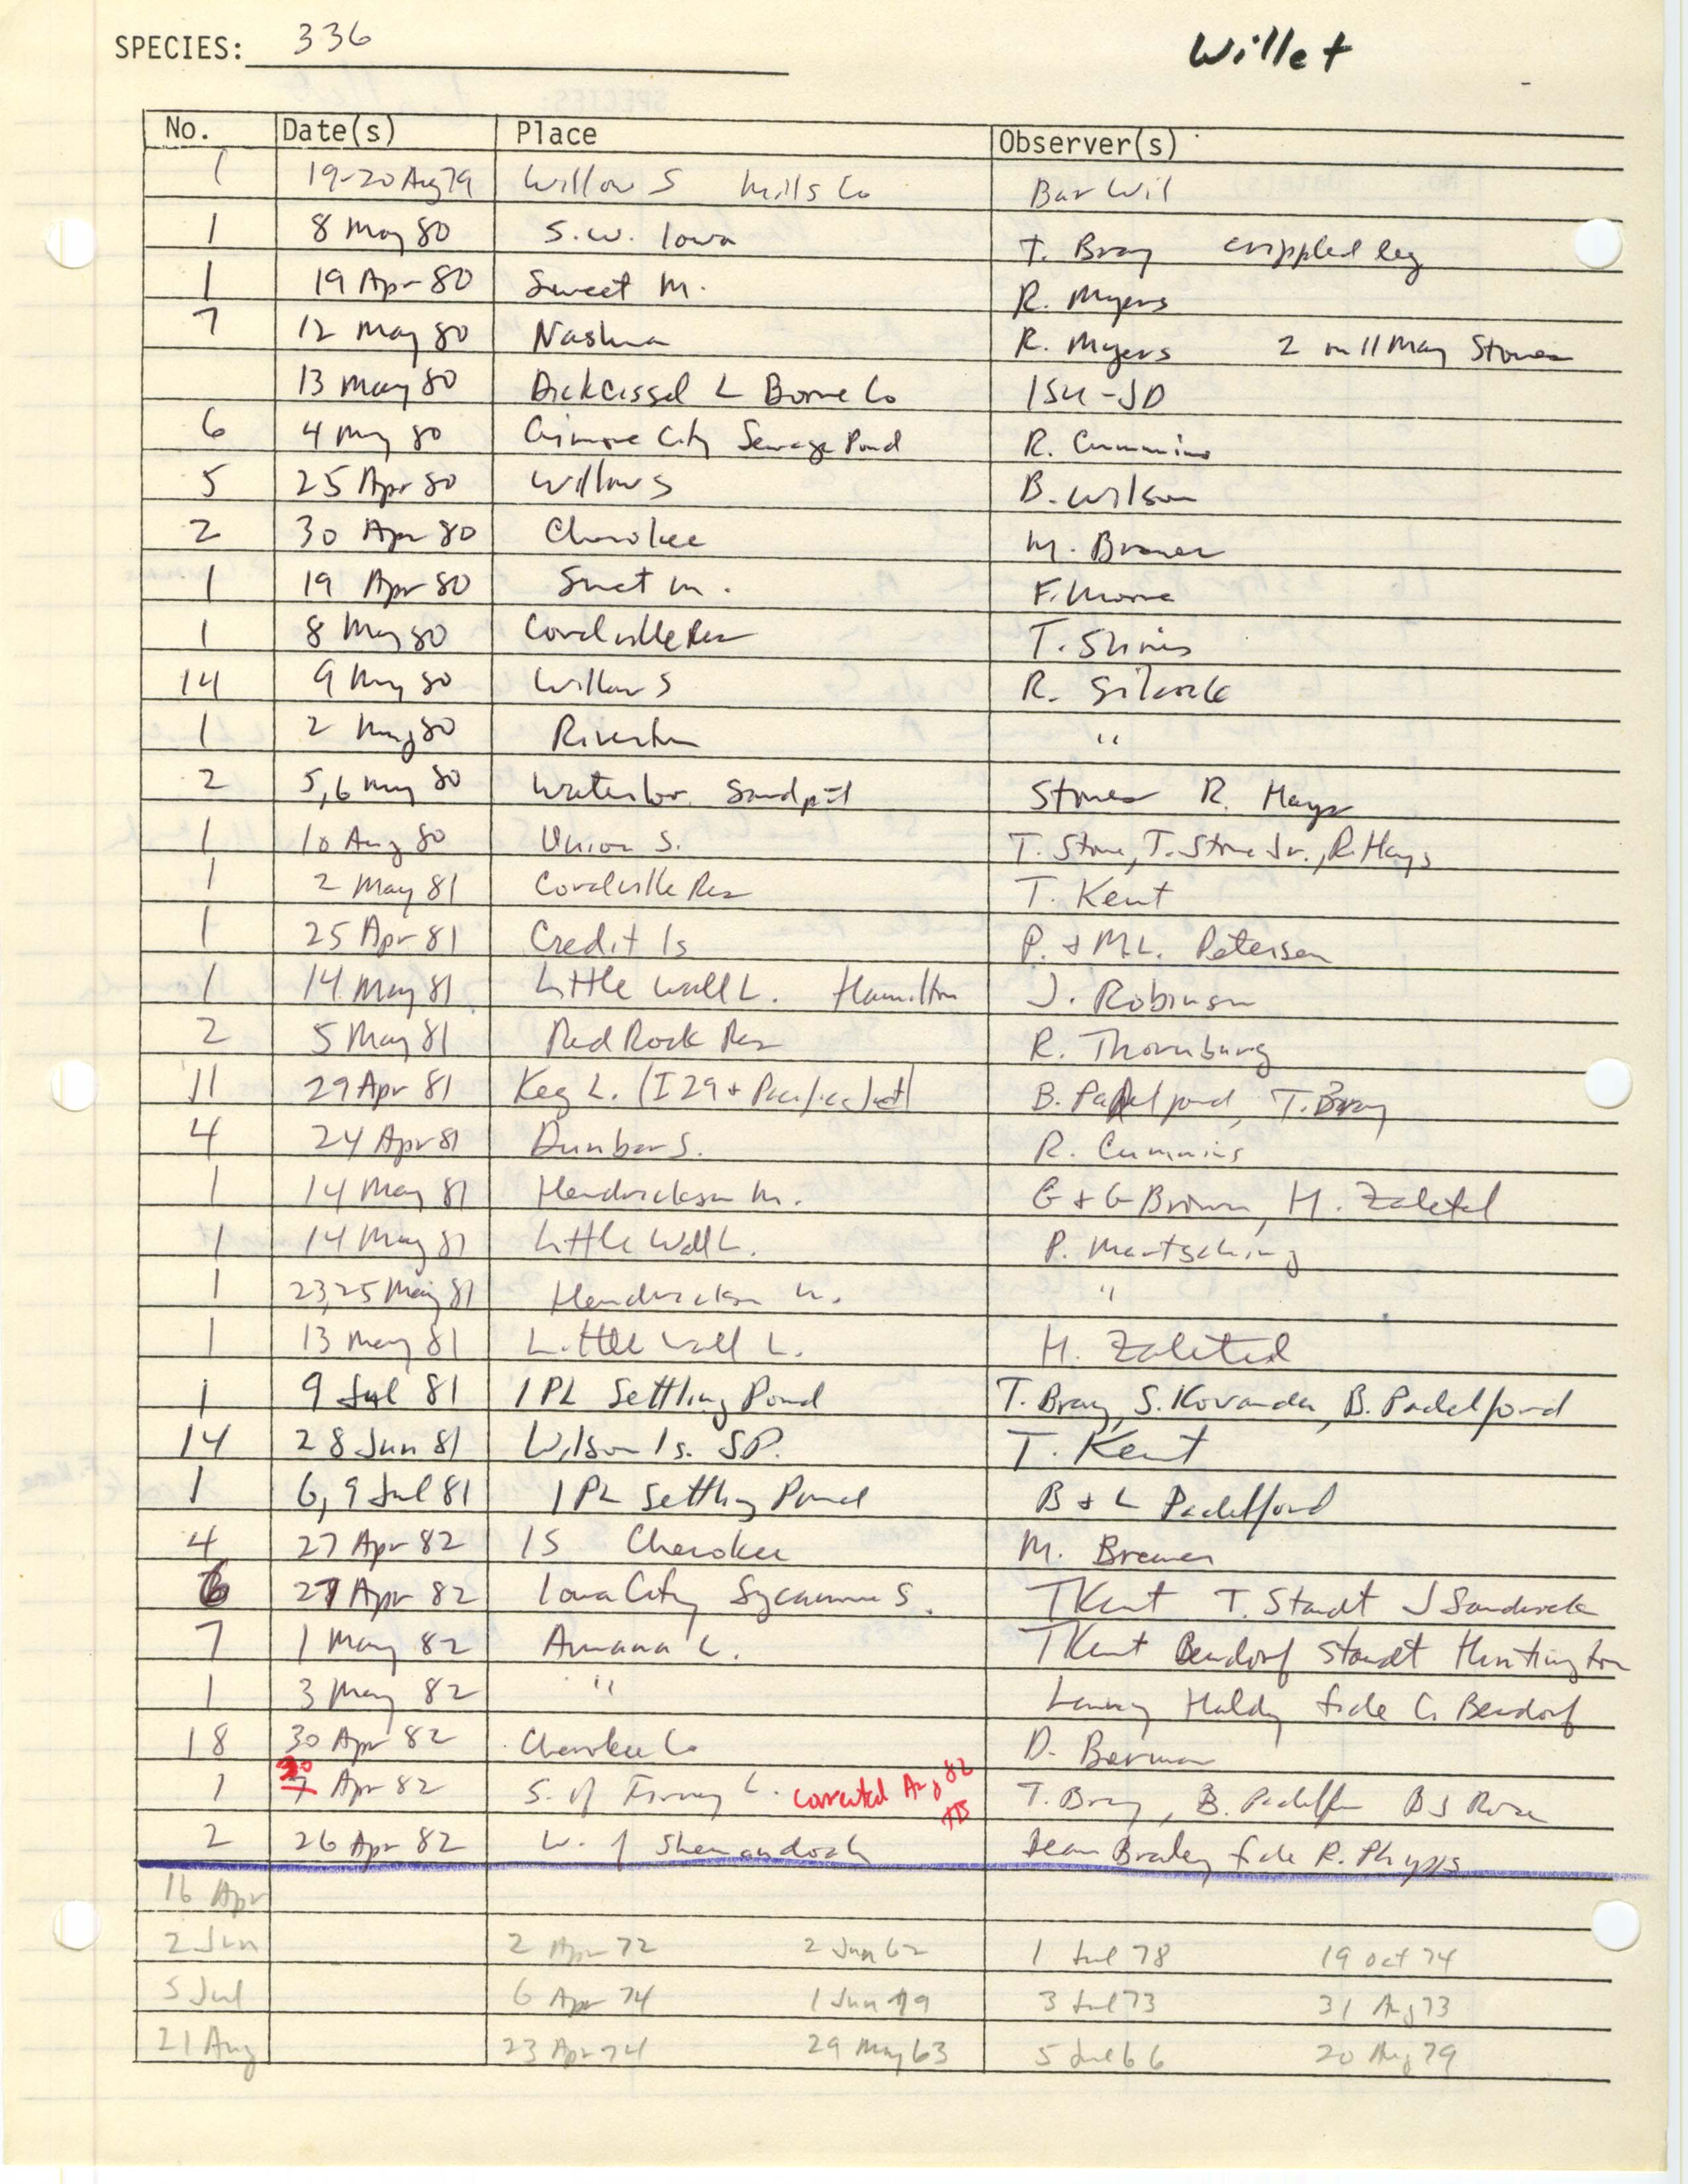 Iowa Ornithologists' Union, field report compiled data, Willet, 1962-1983